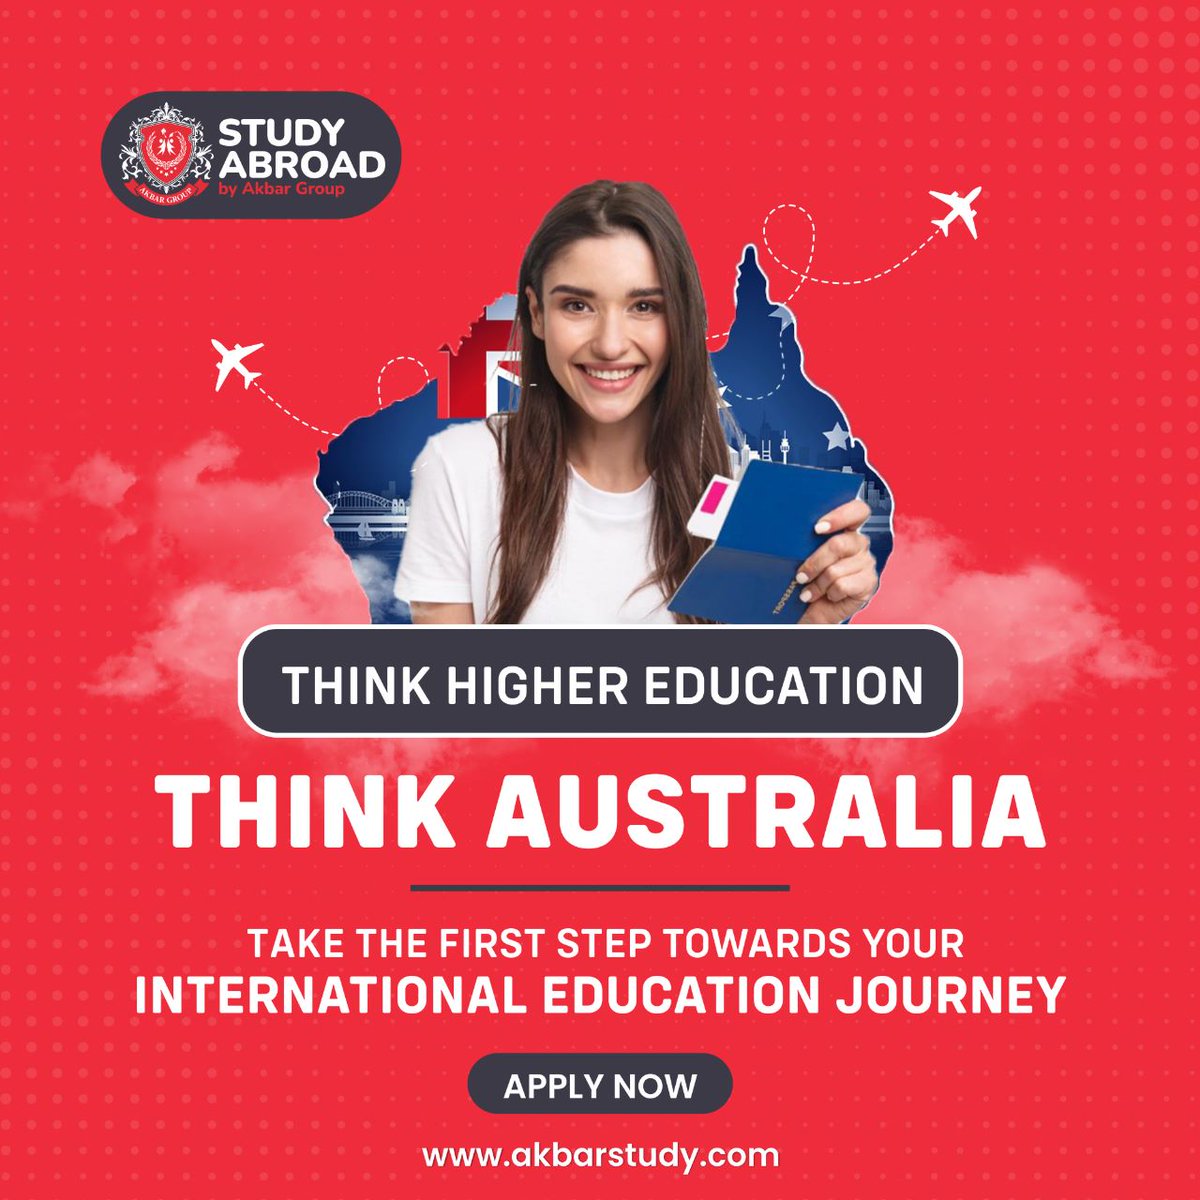 Embark on a journey of learning, growth, and discovery with higher education in Australia
Chat with us - bit.ly/Studybroad
Or Call +91- 7593838928 /9920123180
#StudyAbroad #Countries #AkbarStudyAbroad #VisaAssistance #studyabroadkerala #studyabroadexperts #studyabroadoffice